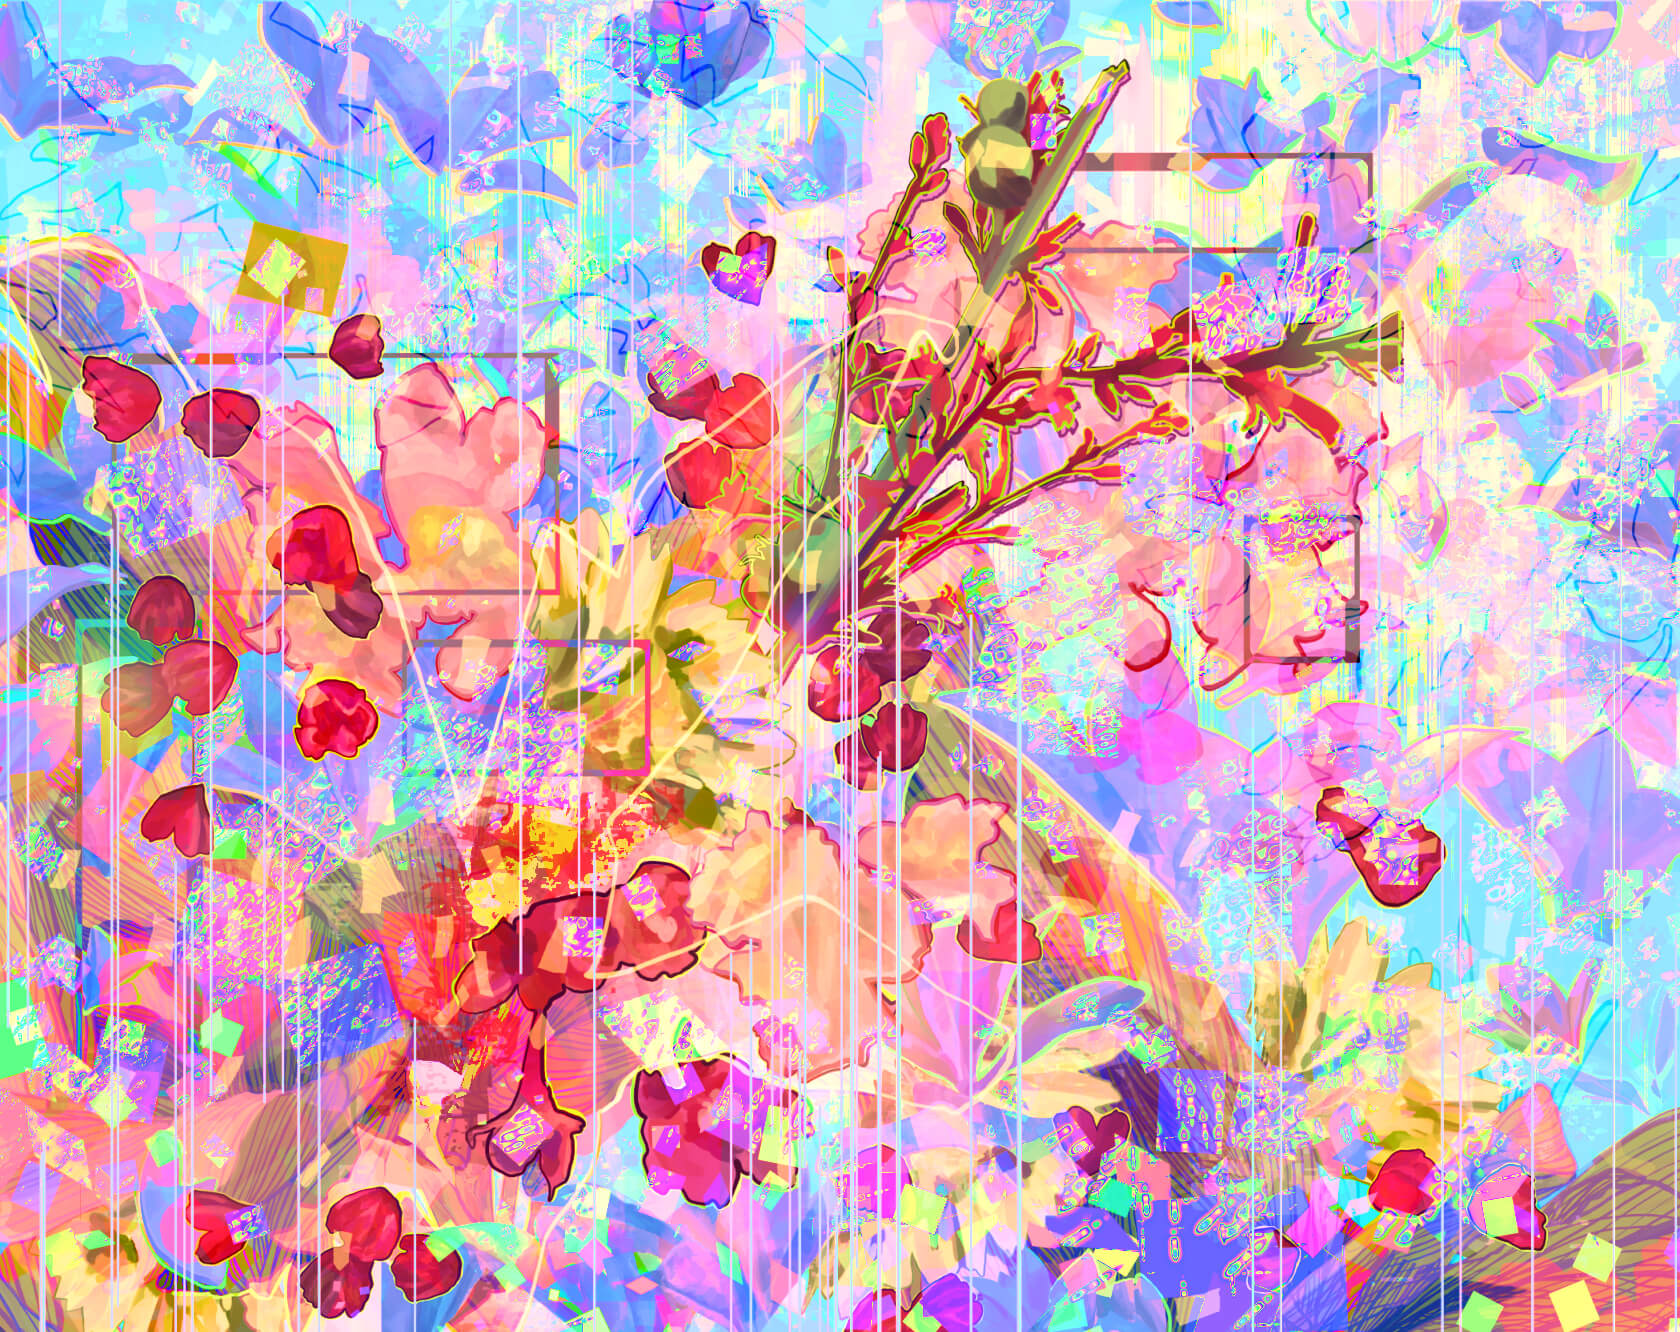 A digital drawing collage, somewhat abstract. Overlaping pink flowers sprout out of the bottom, left corner. The background is bright blue with purple flowers and bright glitch effects.